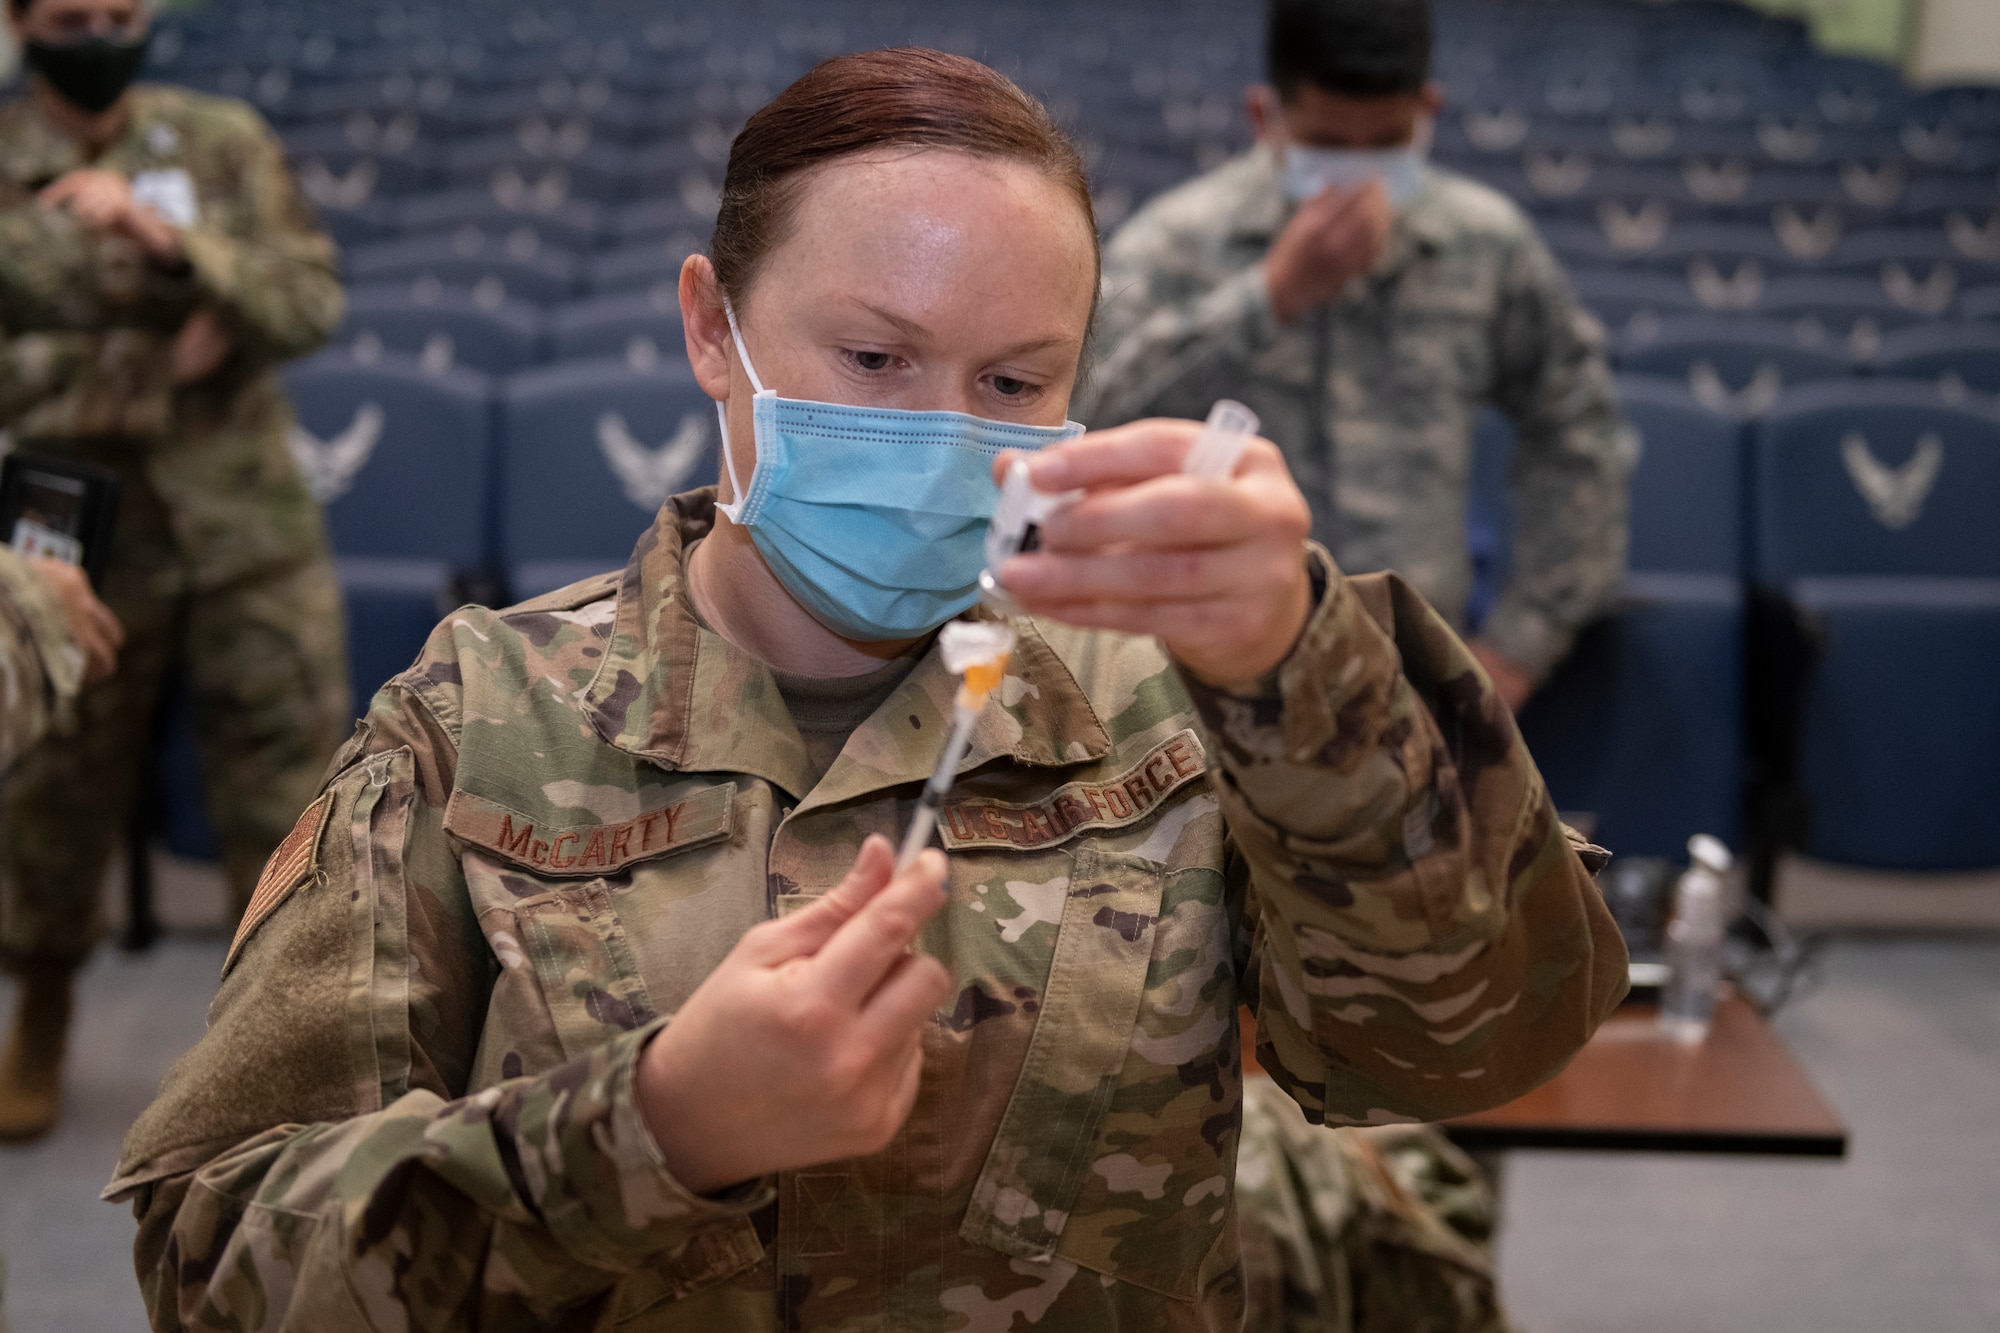 U.S. Air Force Tech. Sgt. Lori McCarty, 60th Healthcare Operations Squadron allergy immunization technician, fills an injection needle with the COVID-19 vaccine Dec. 22, 2020, at Travis Air Force Base, California. David Grant U.S. Air Force Medical Center is the largest Air Force medical facility and provides care to more than 276,000 Department of Defense and Veteran Affairs eligible beneficiaries. Essential medical personnel from the 60th Medical Group were the first to receive the vaccine at Travis AFB. (U.S. Air Force photo by Senior Airman Cameron Otte)